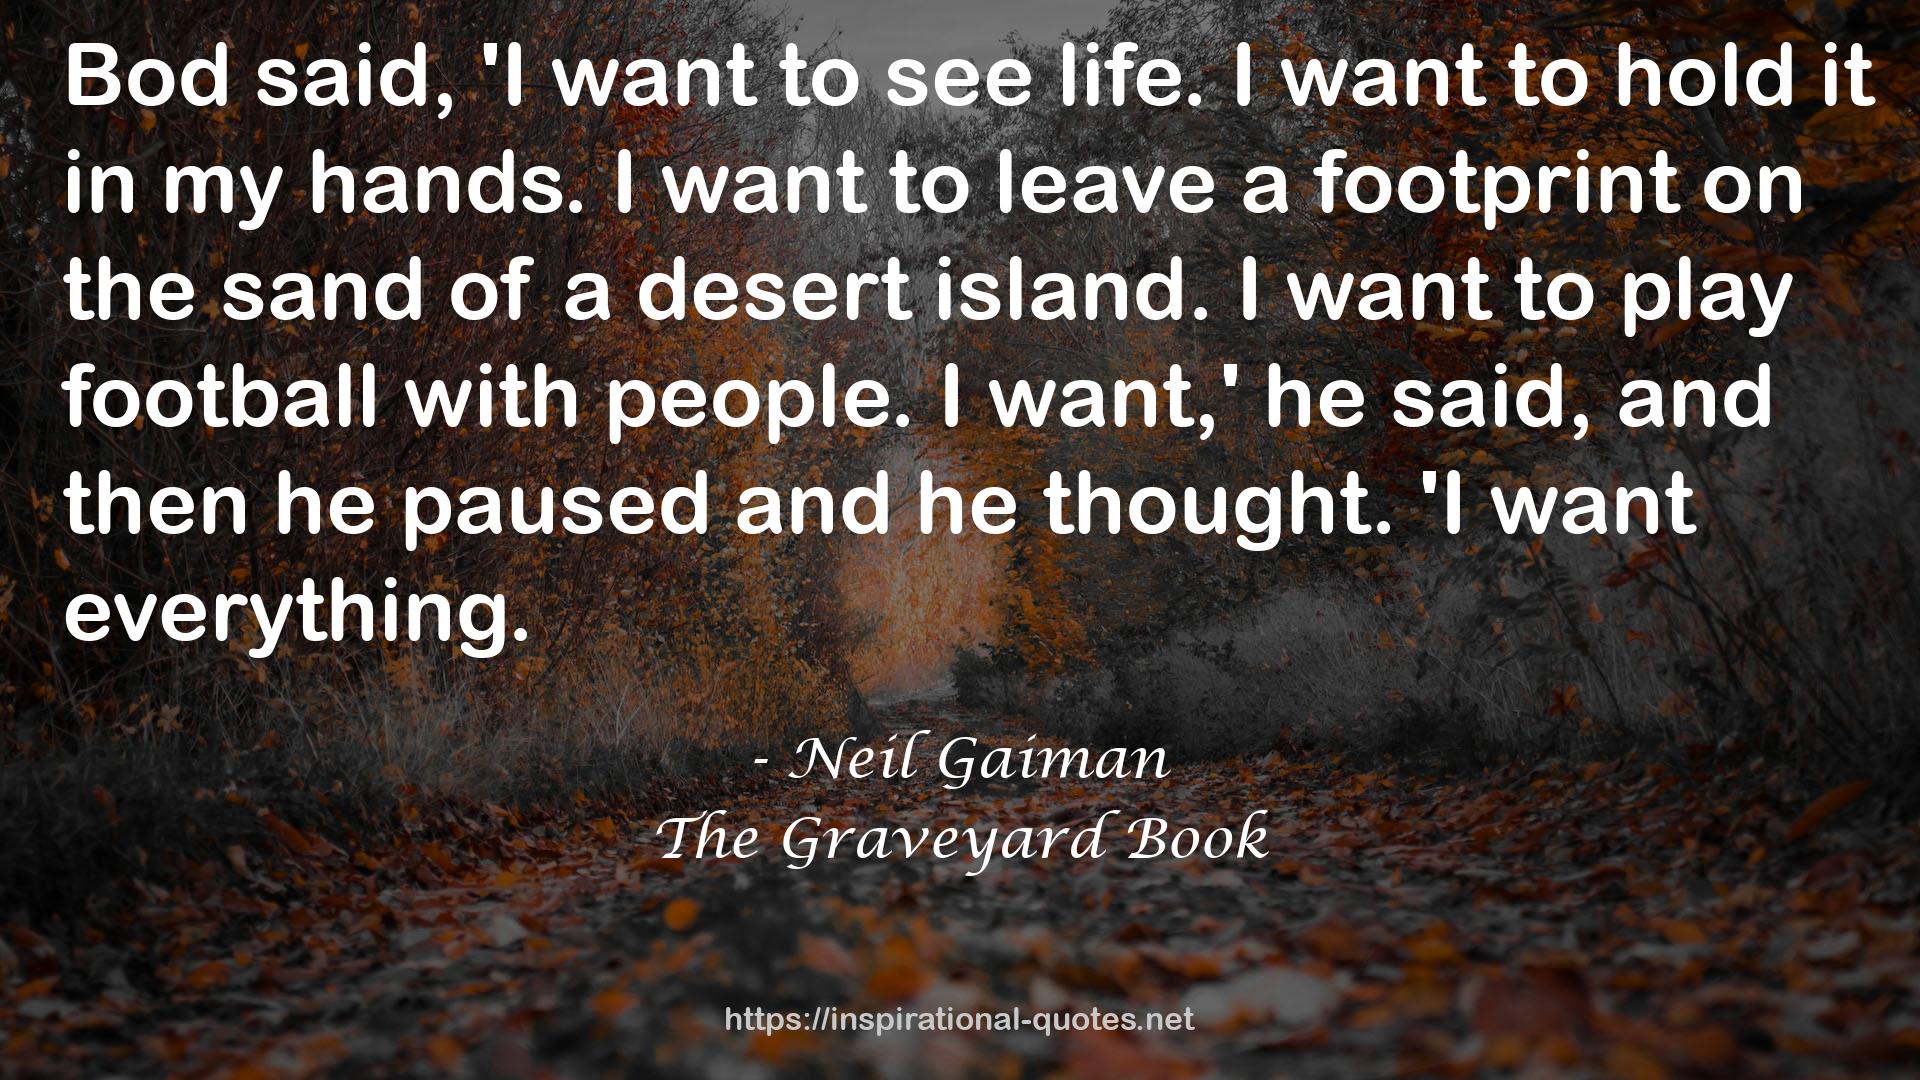 The Graveyard Book QUOTES